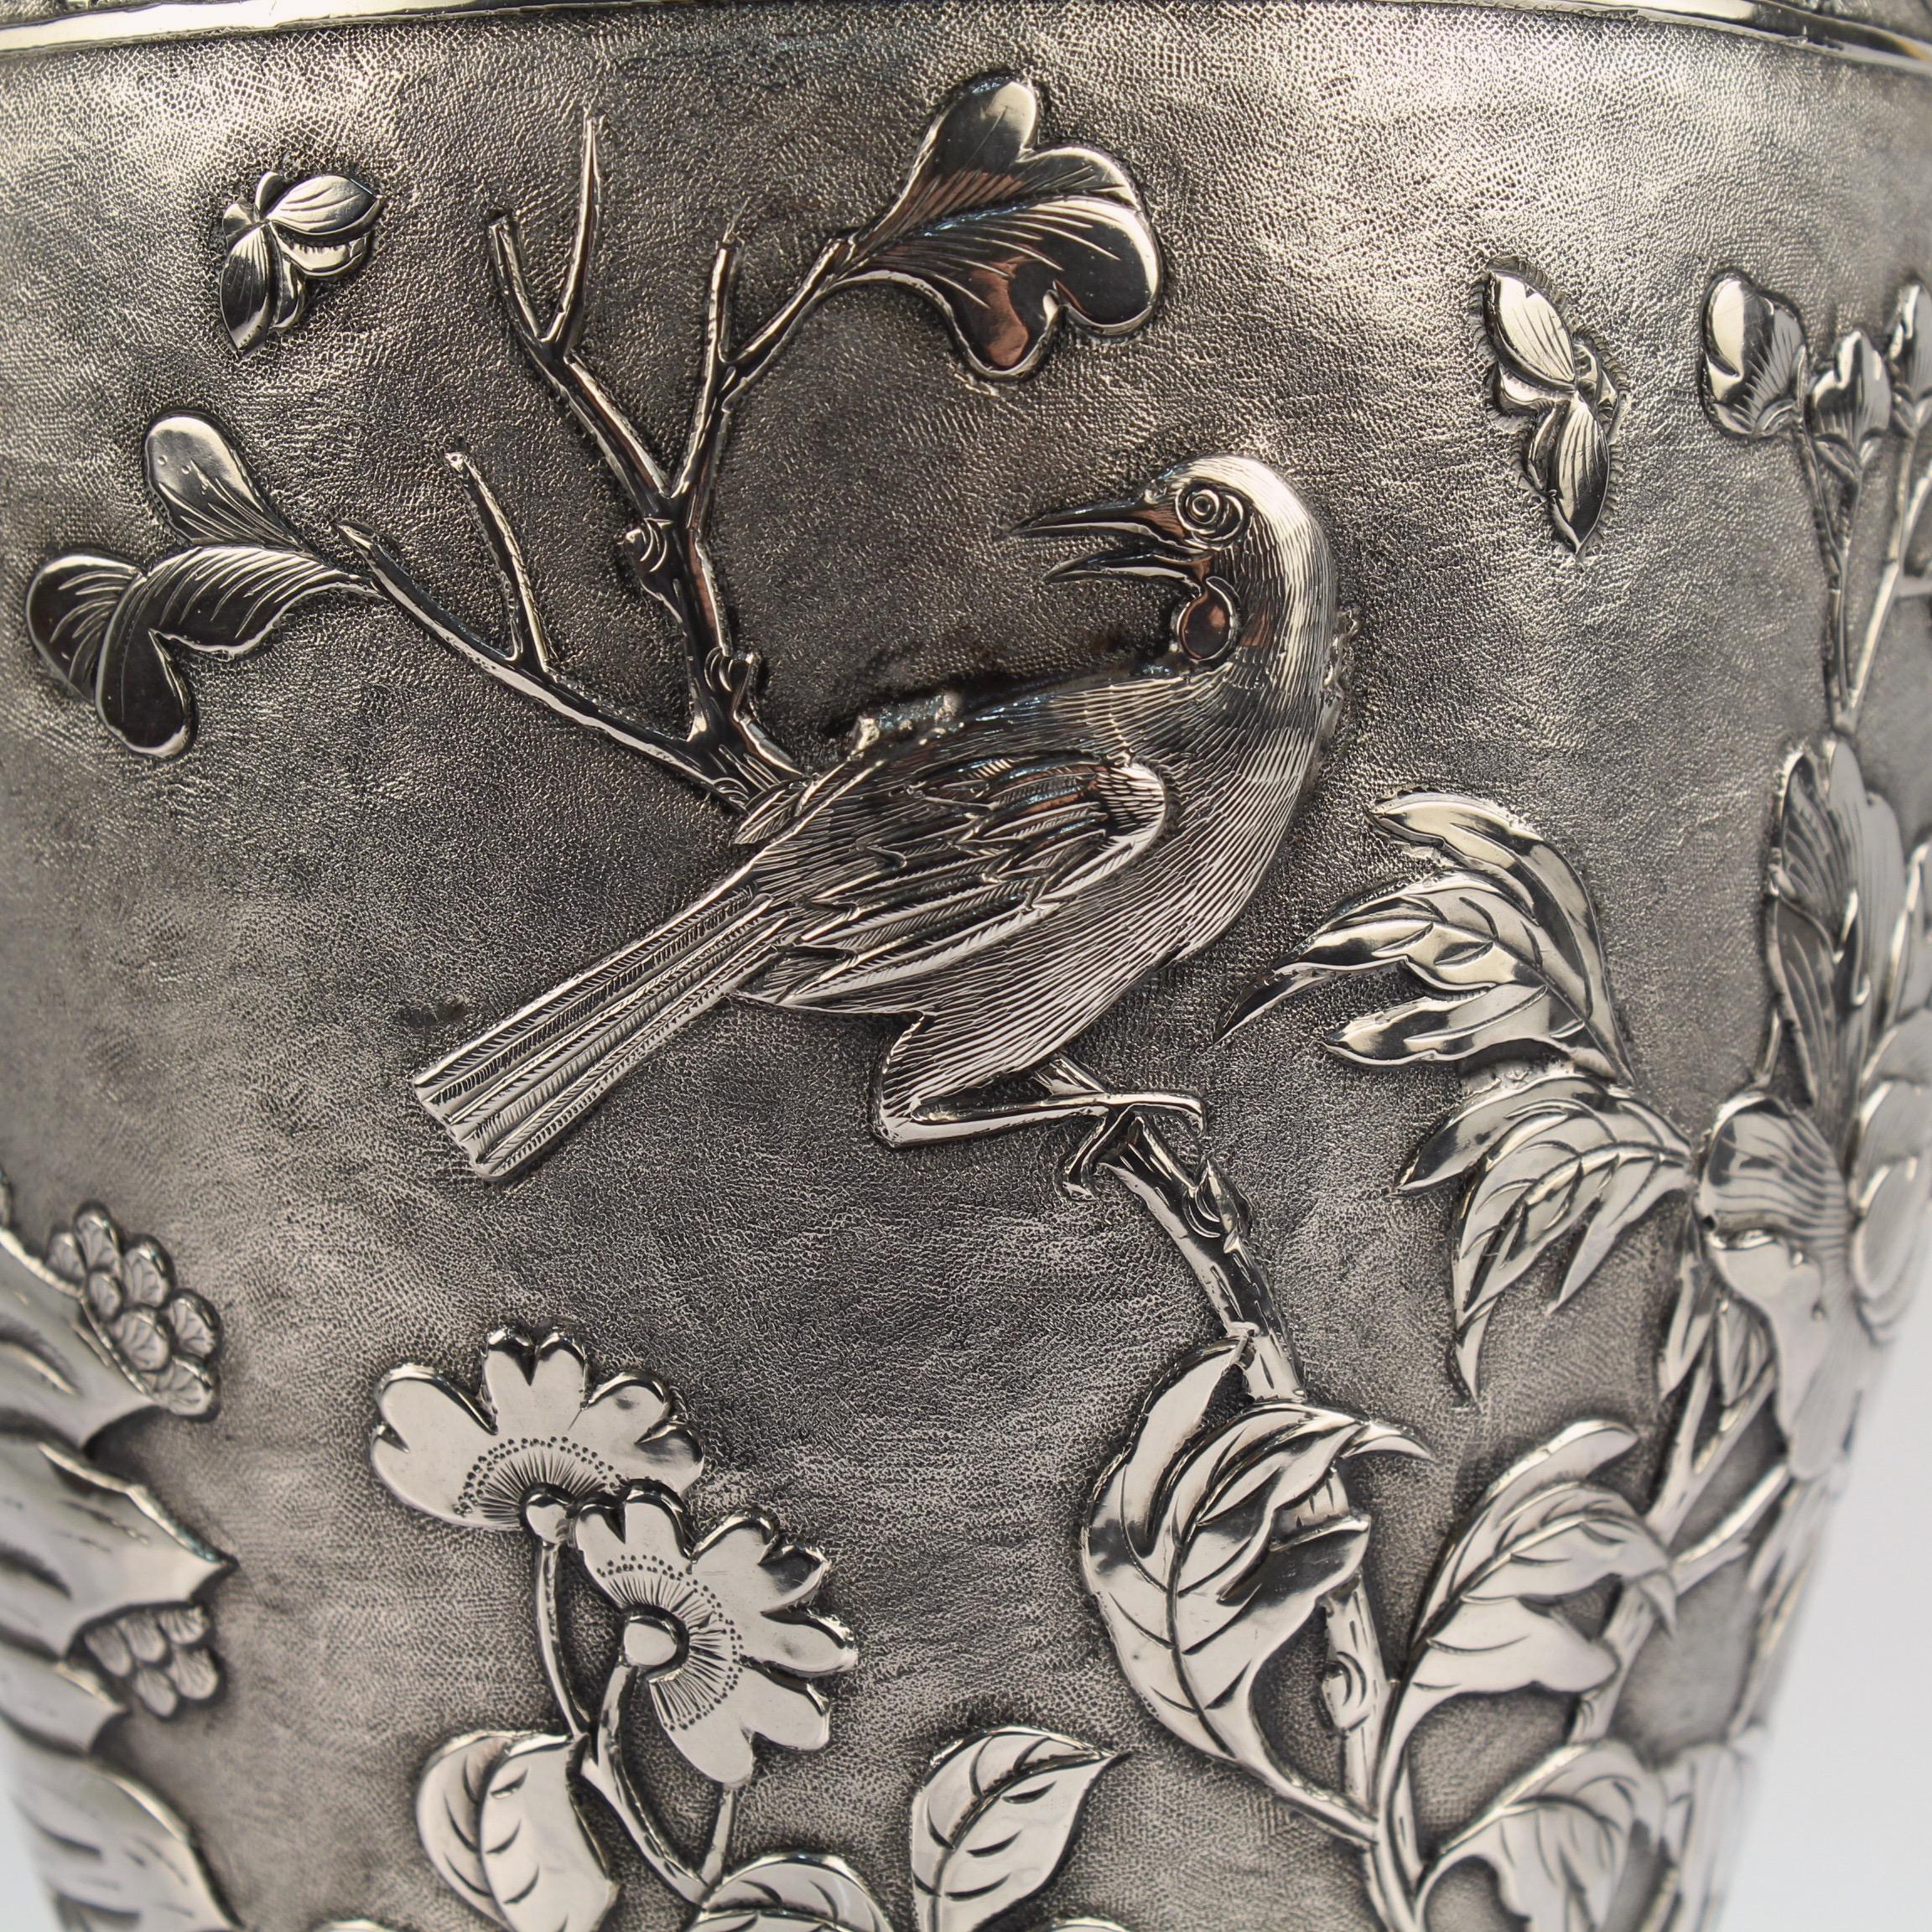 Antique Signed Chinese Export Sterling Silver Vase with Landscape and Figures For Sale 6